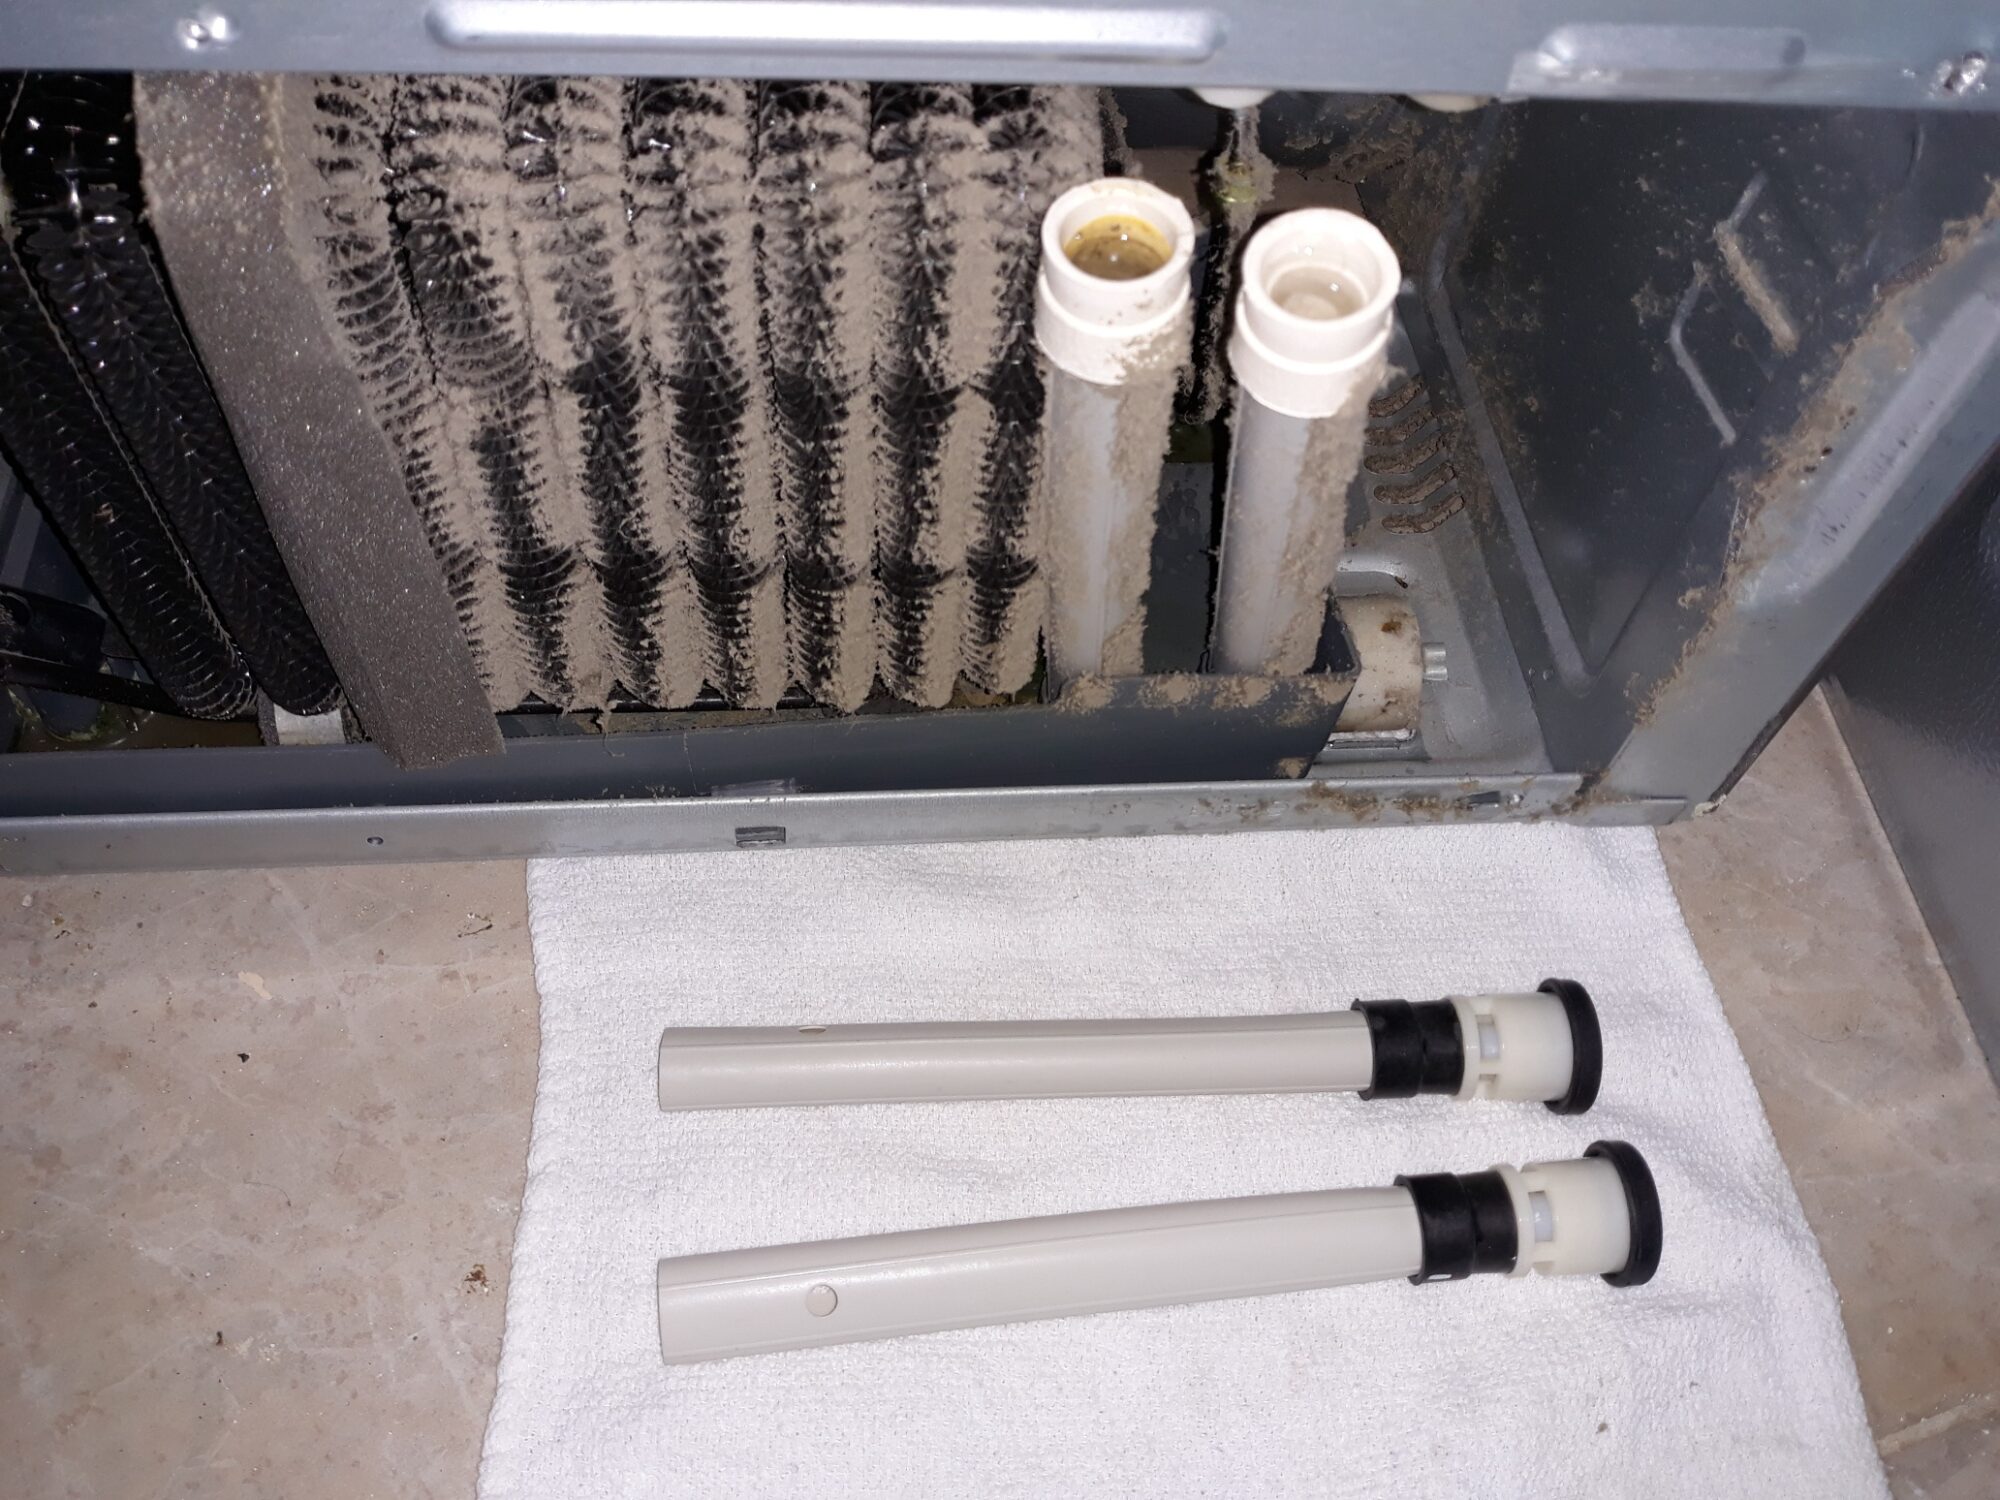 appliance repair refrigerator repair repair required replacement of the old drains with the new upgraded drains and internal frost preventive kit willard ave fruitland park fl 34731